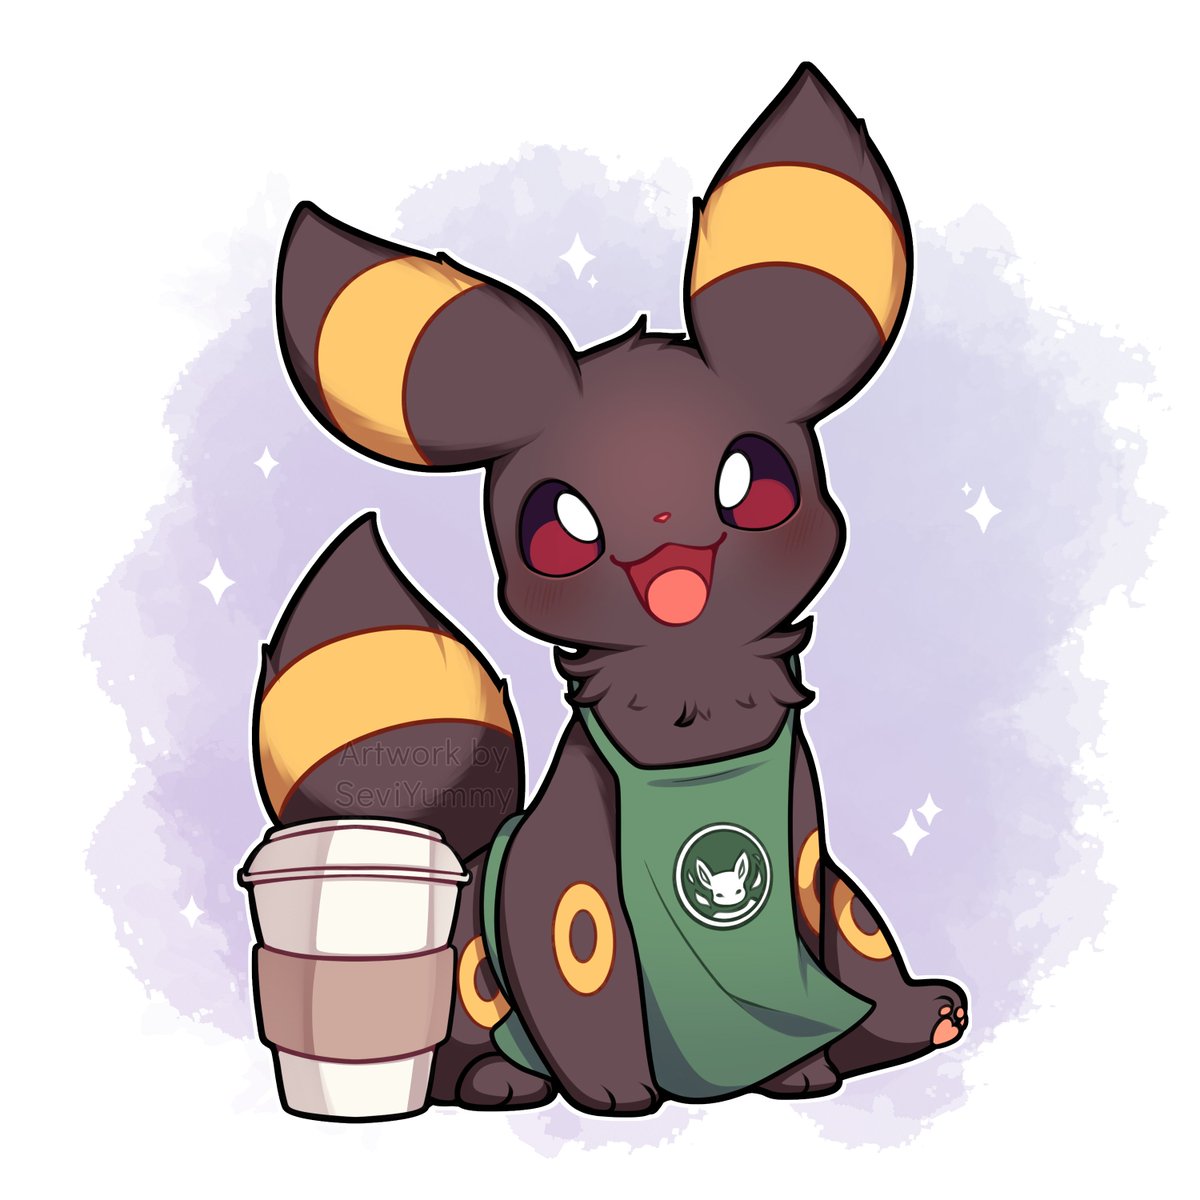 「New Eeveelution Cafe! Today Umbreon will」|Sevi 🌸🌿のイラスト